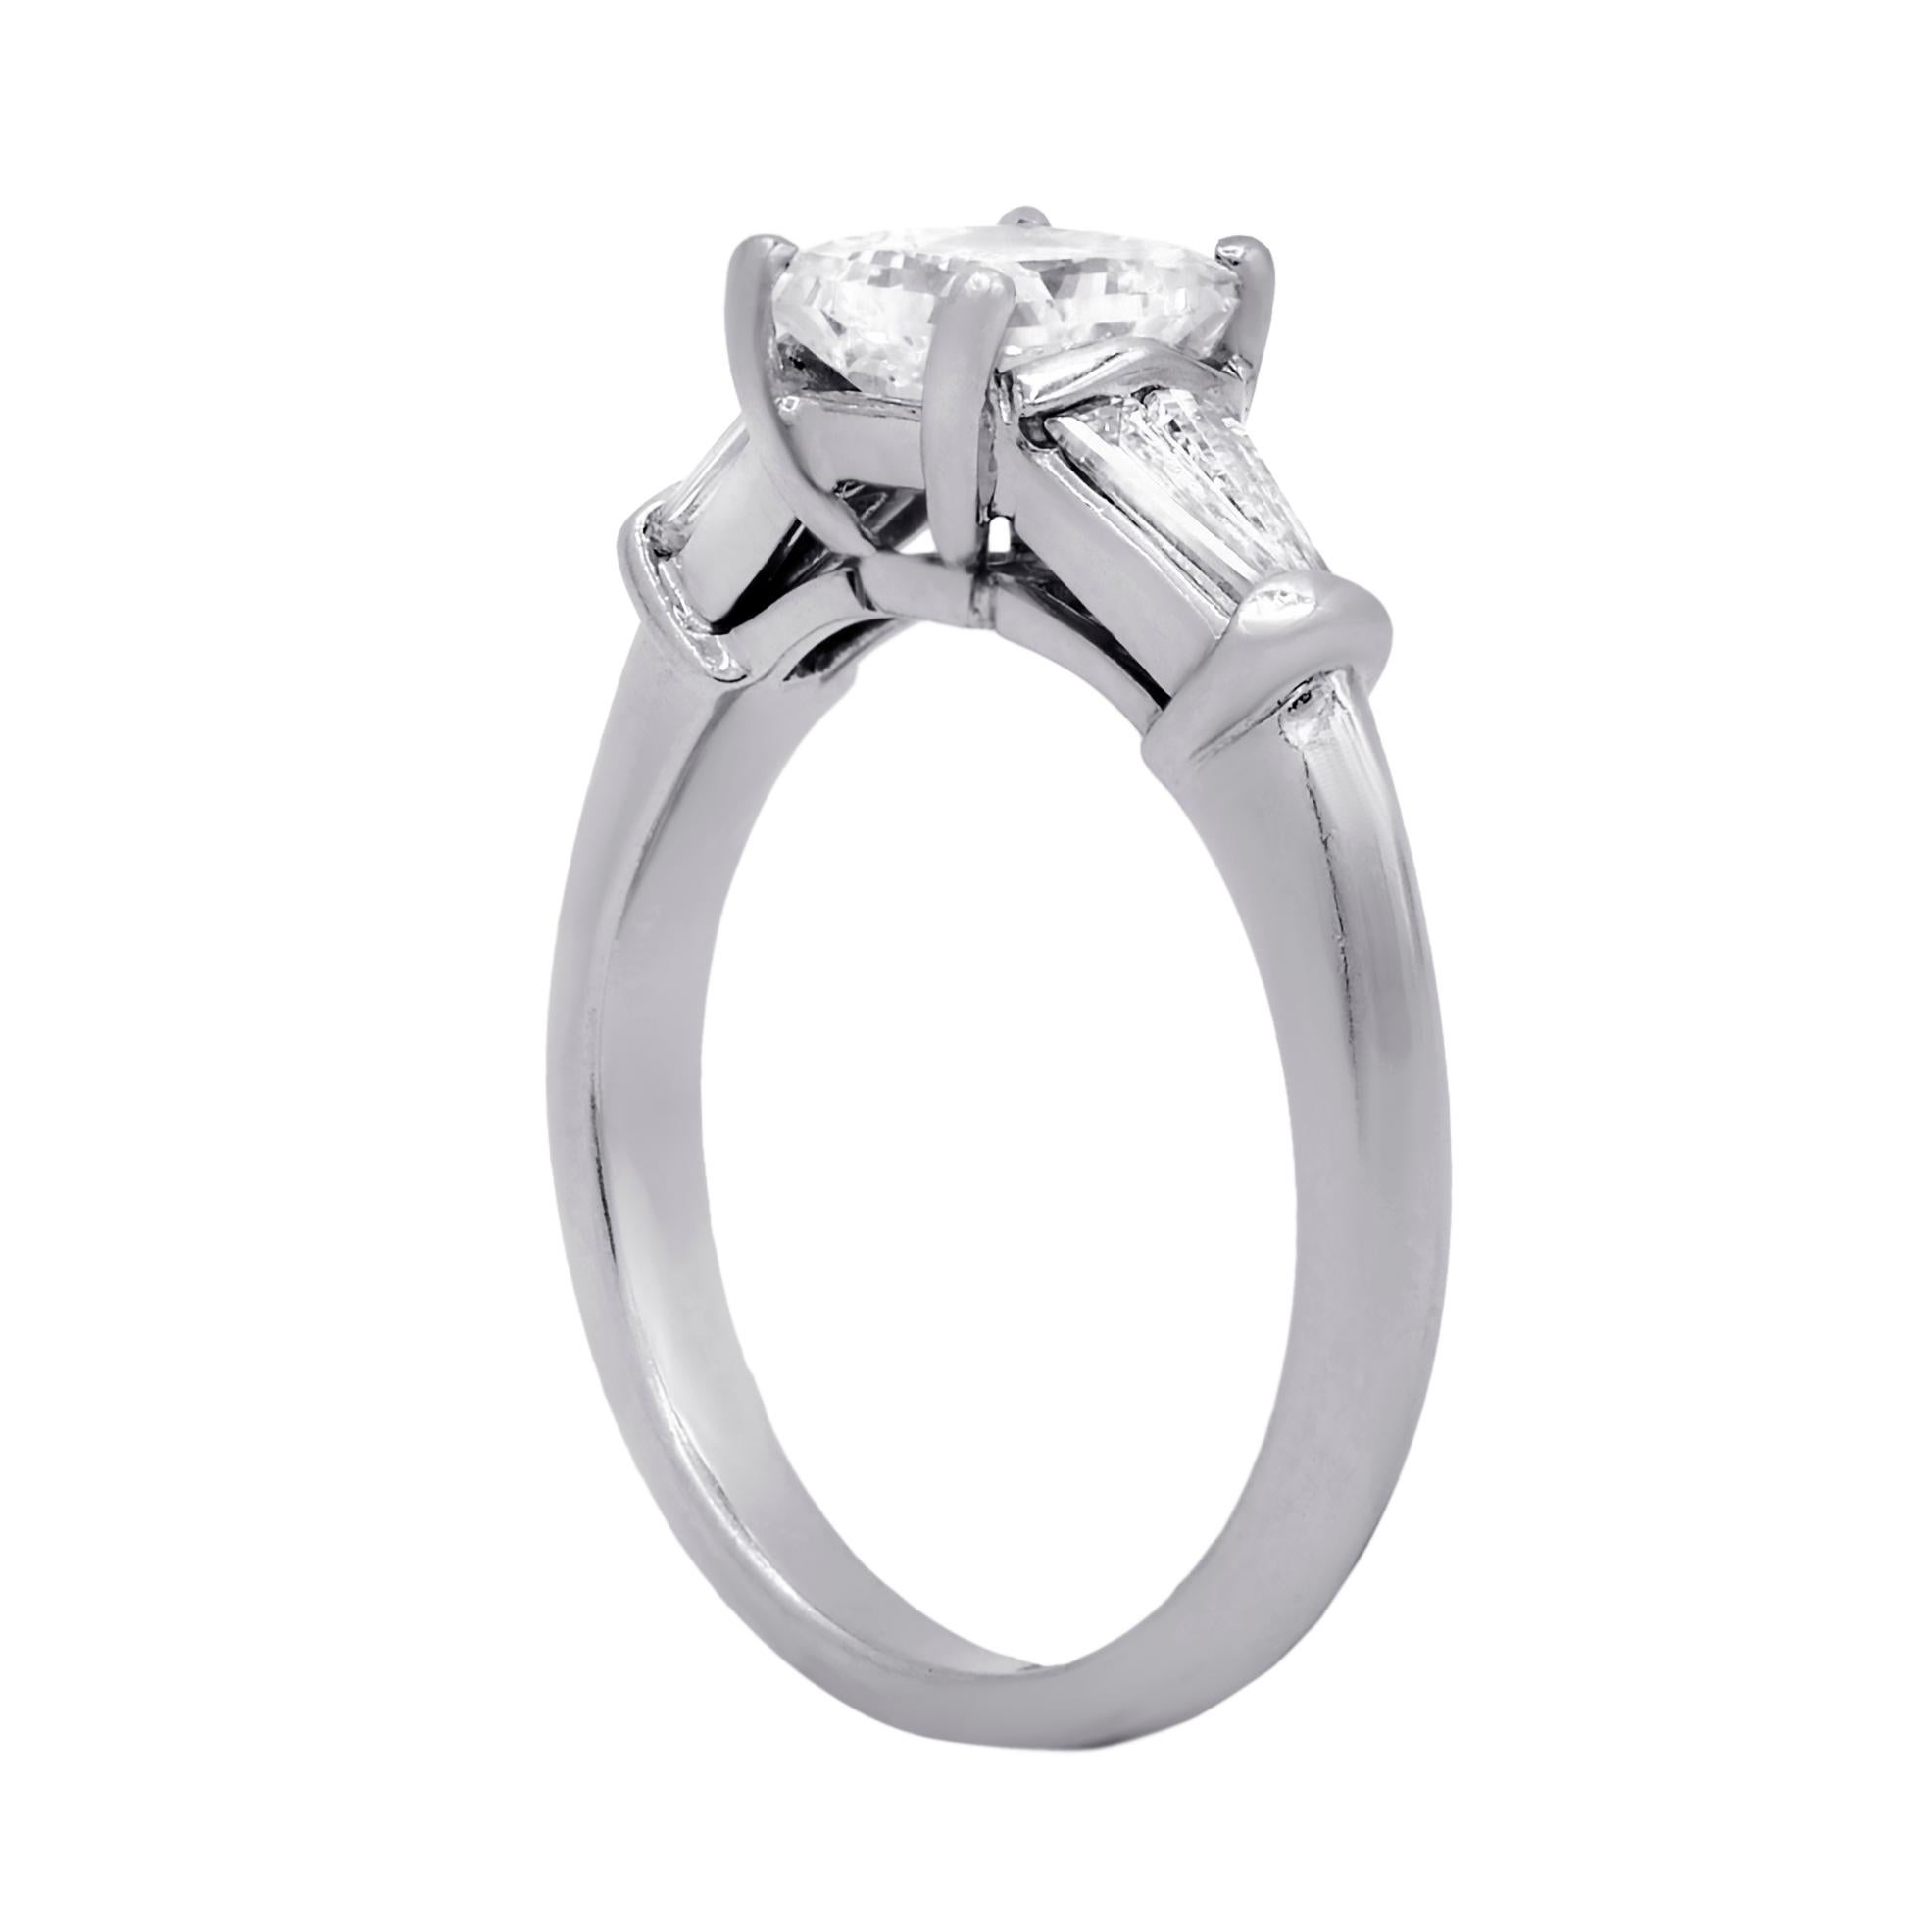 Plat princess cut engagement ring with center gia certified princess diamond (prc772) 1.01 I-vs2 set with 2 baguette  diamonds in lucida setting.
